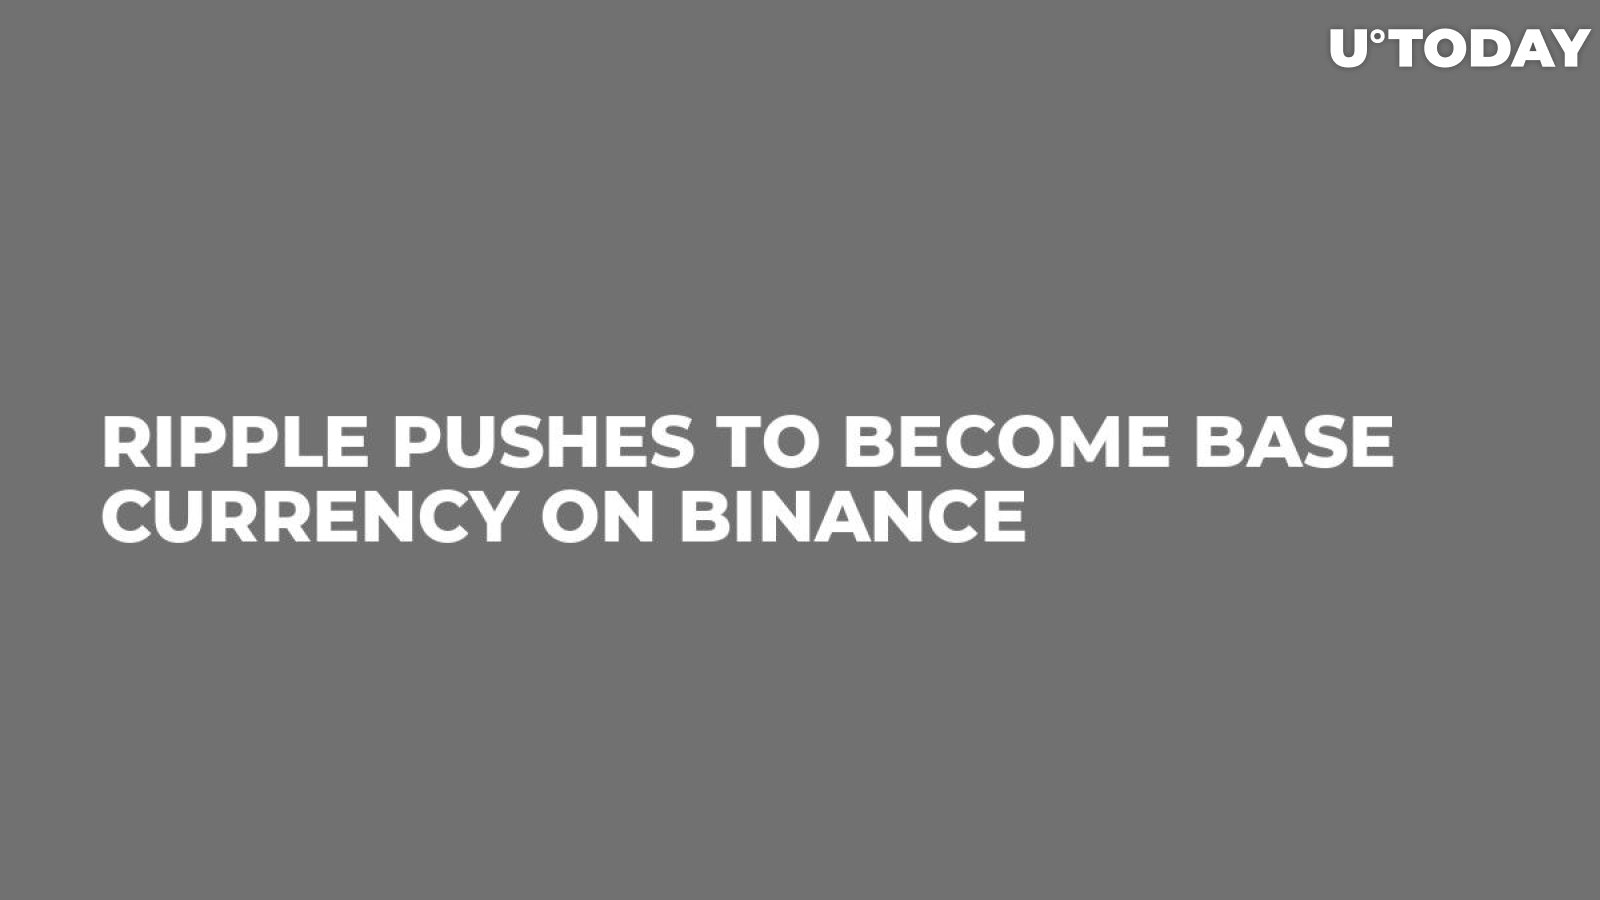 Ripple Pushes to Become Base Currency on Binance